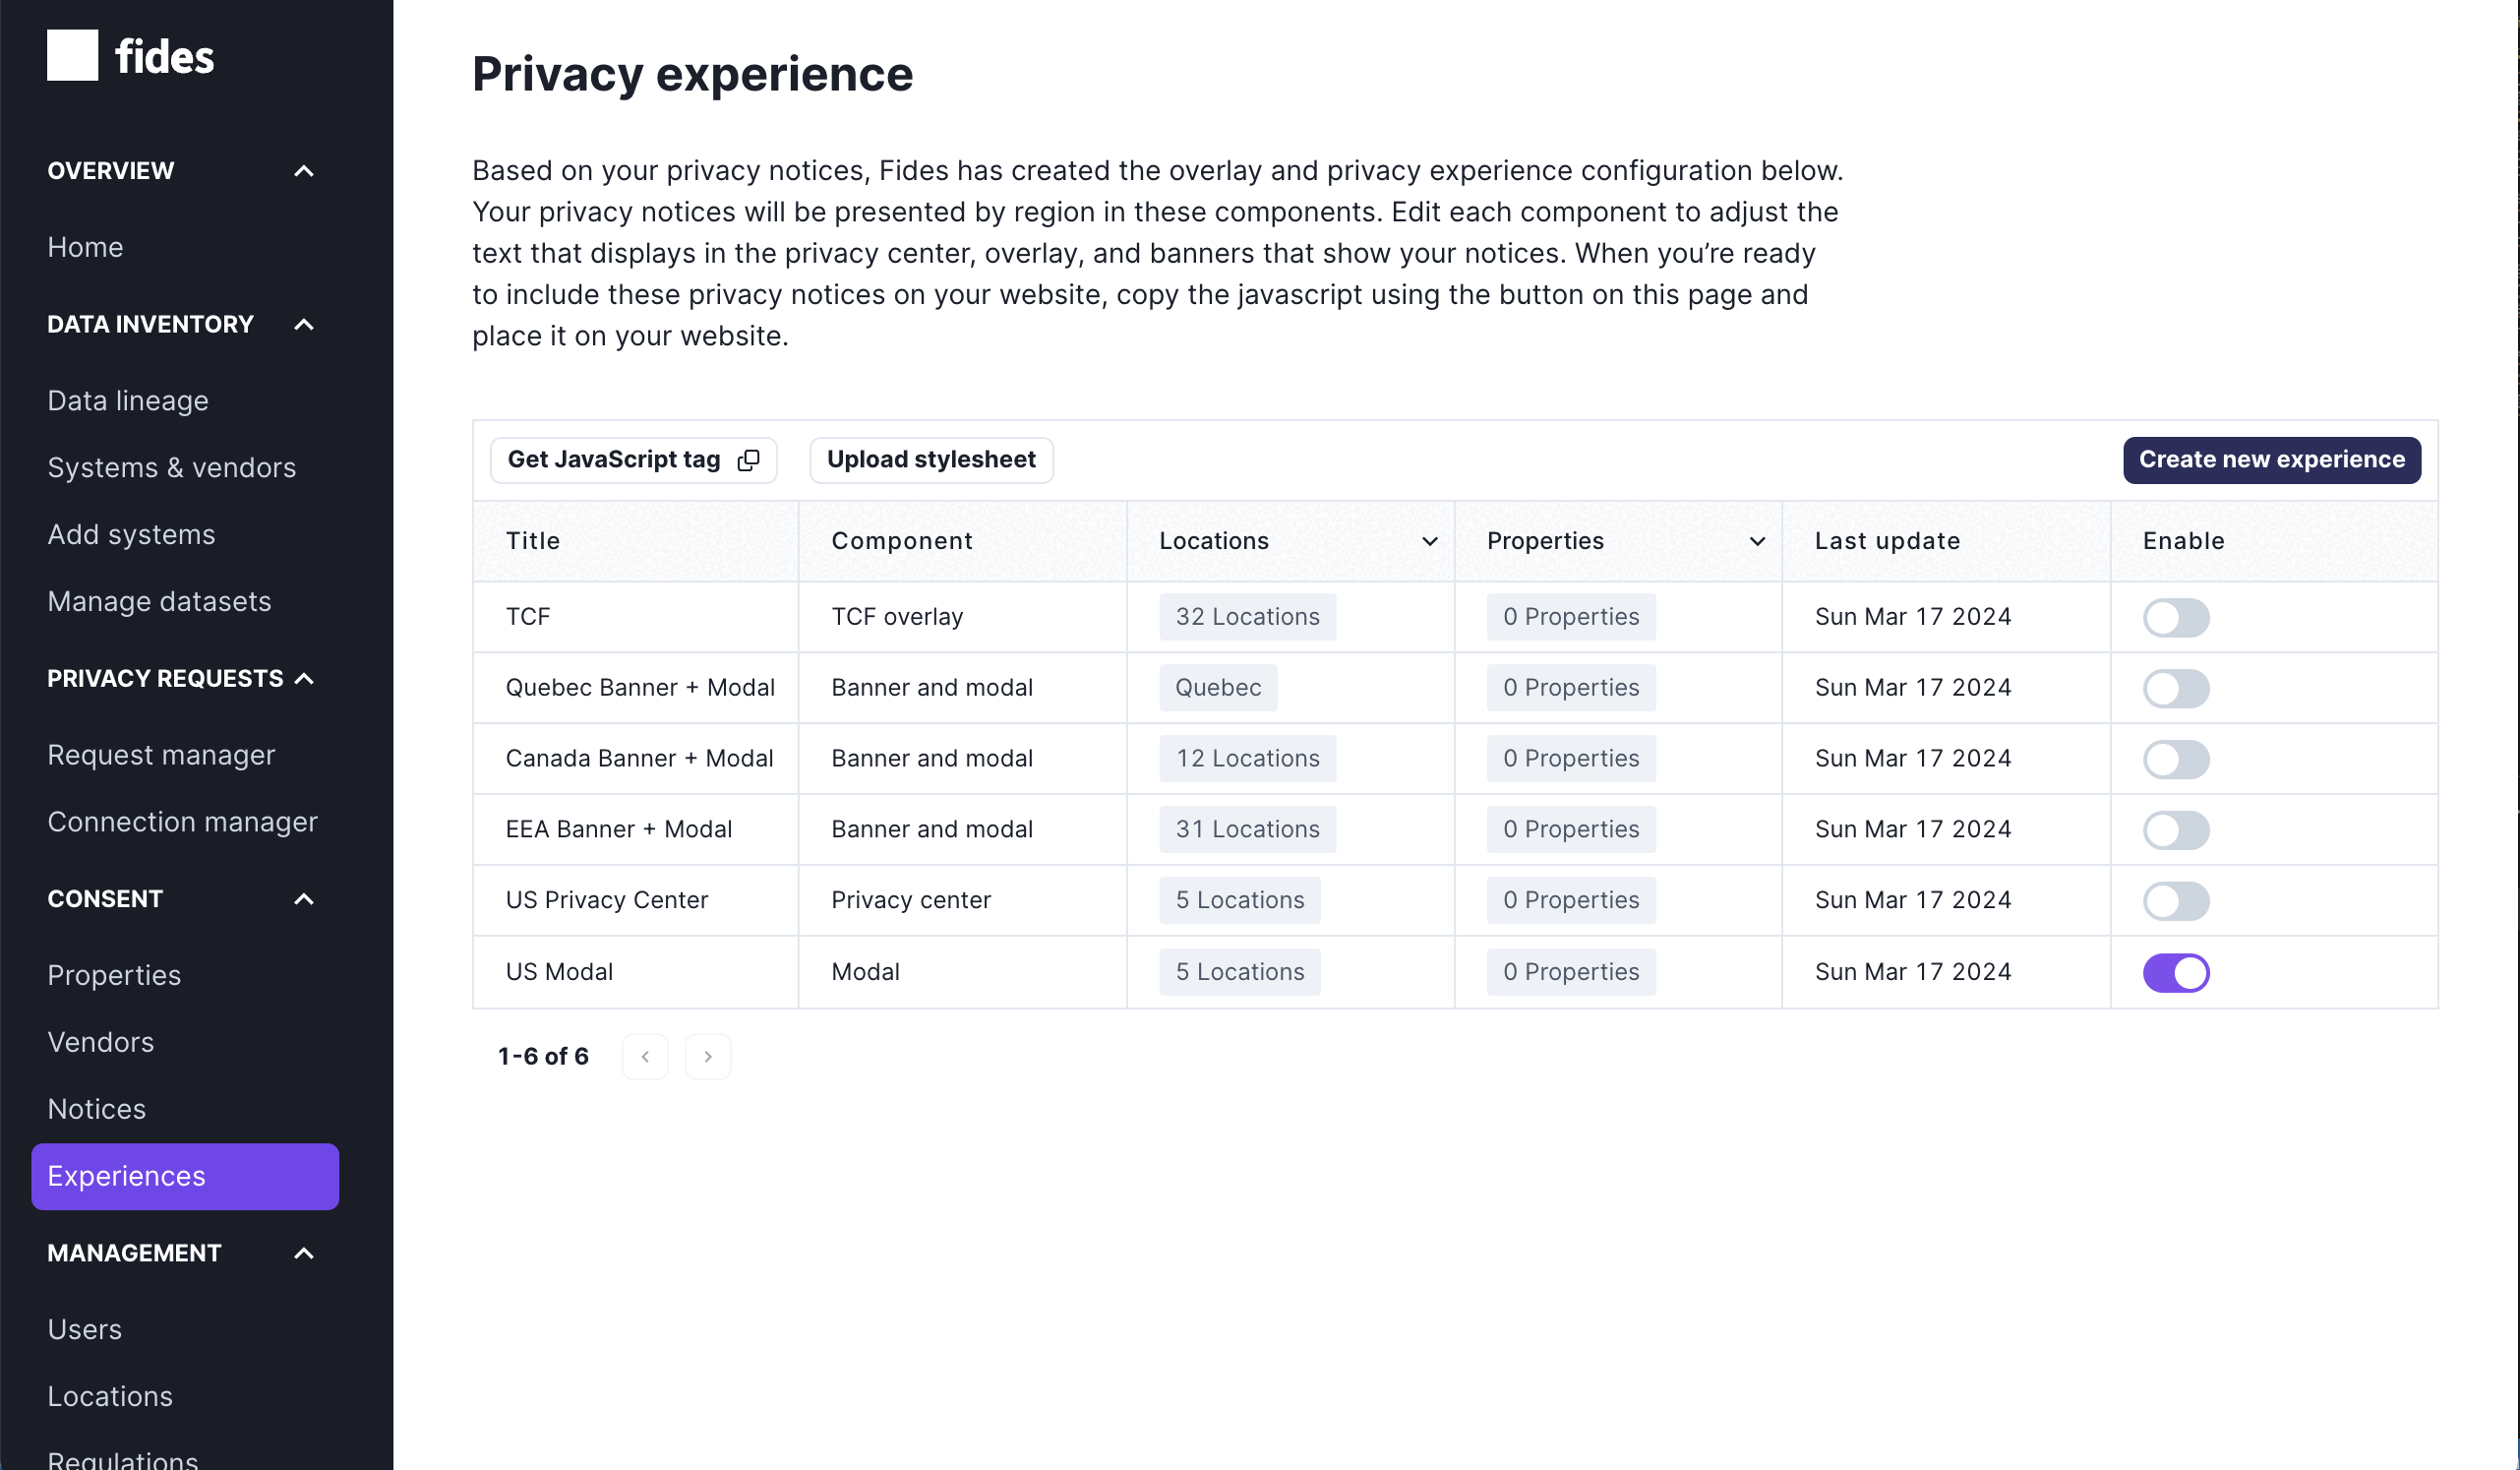 View all Privacy Experiences